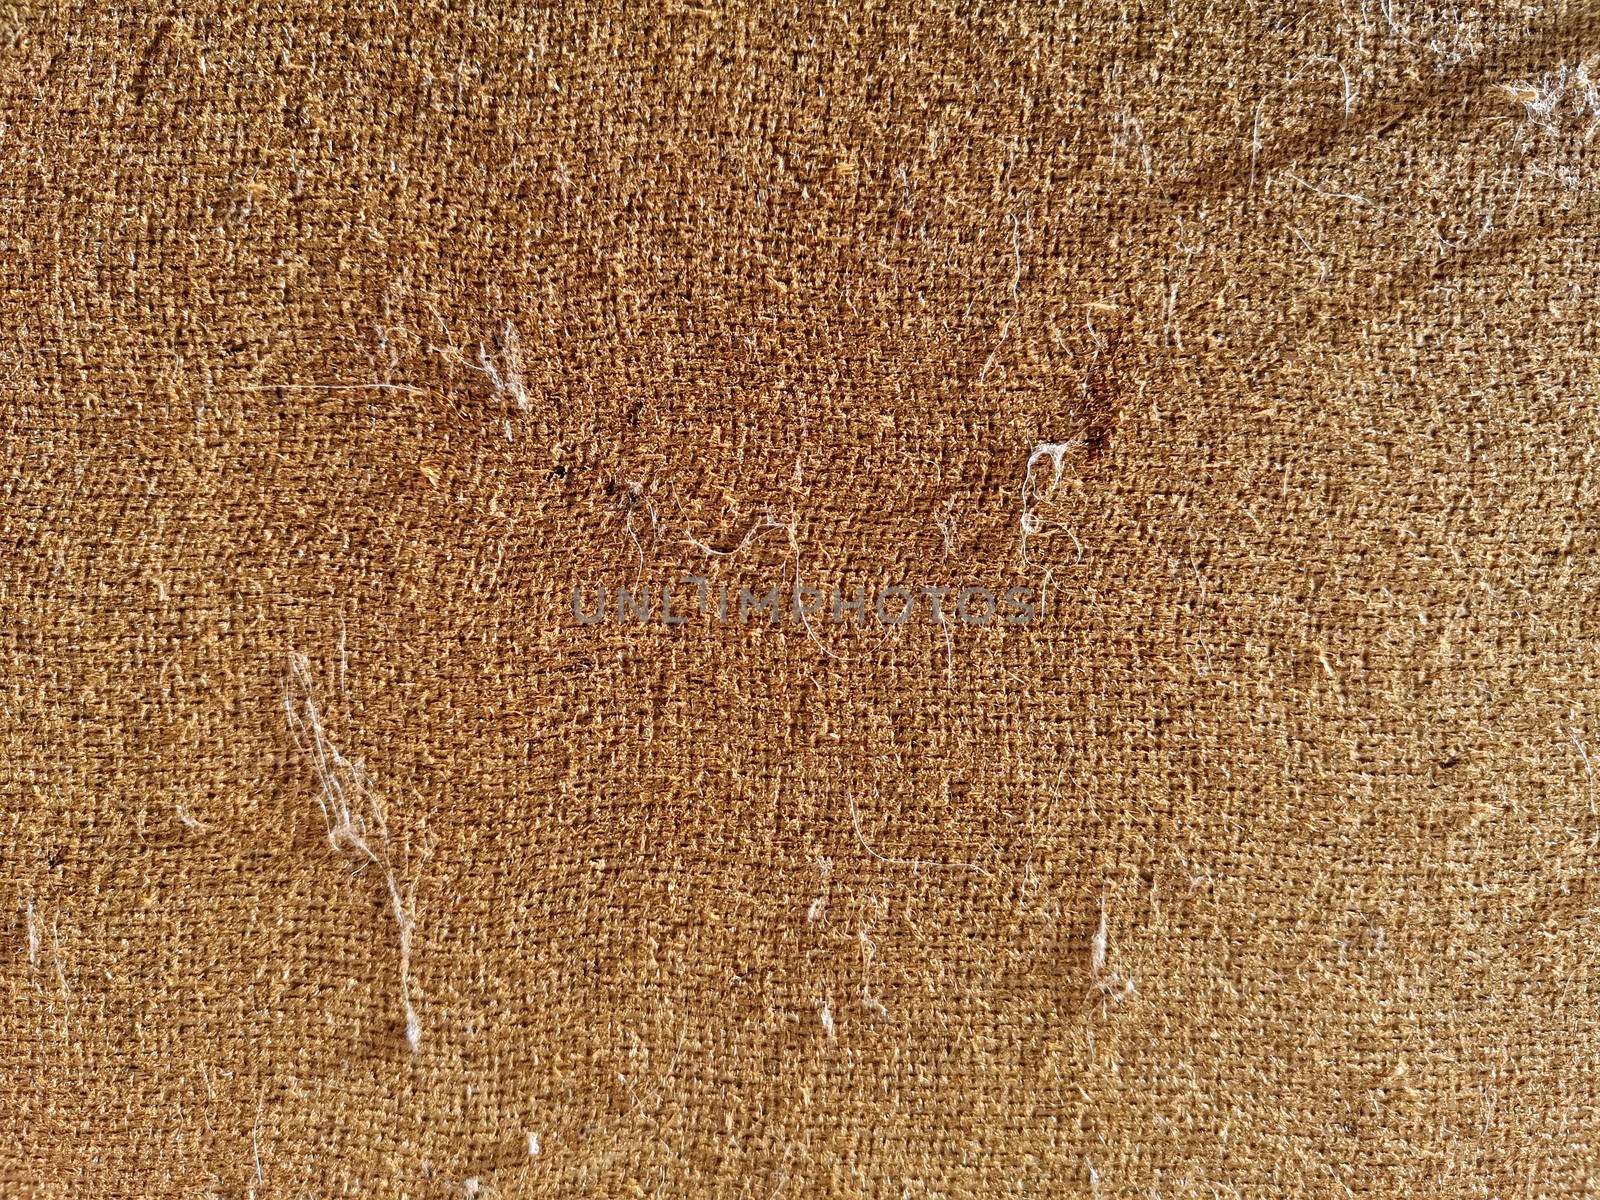 Rough fabric of light brown color, closeup, background texture.